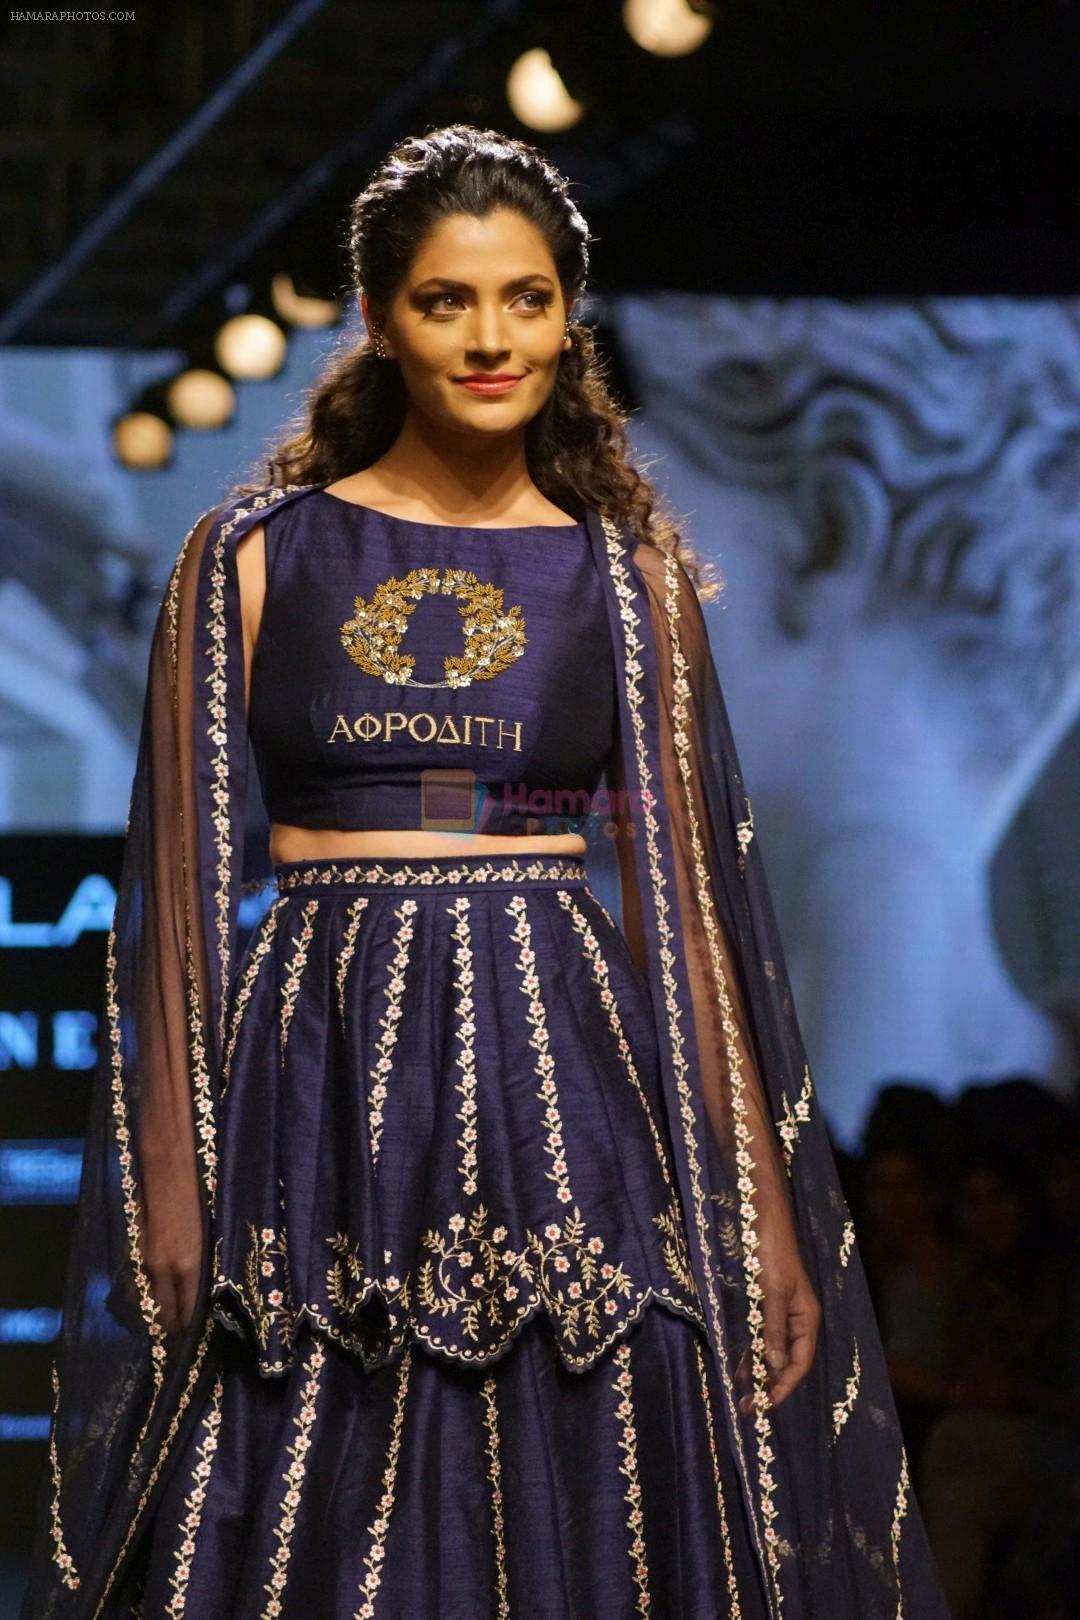 Saiyami Kher On Ramp Walks For Nachiket Barve As A Showstopper For LFW 2017 on 19th Aug 2017